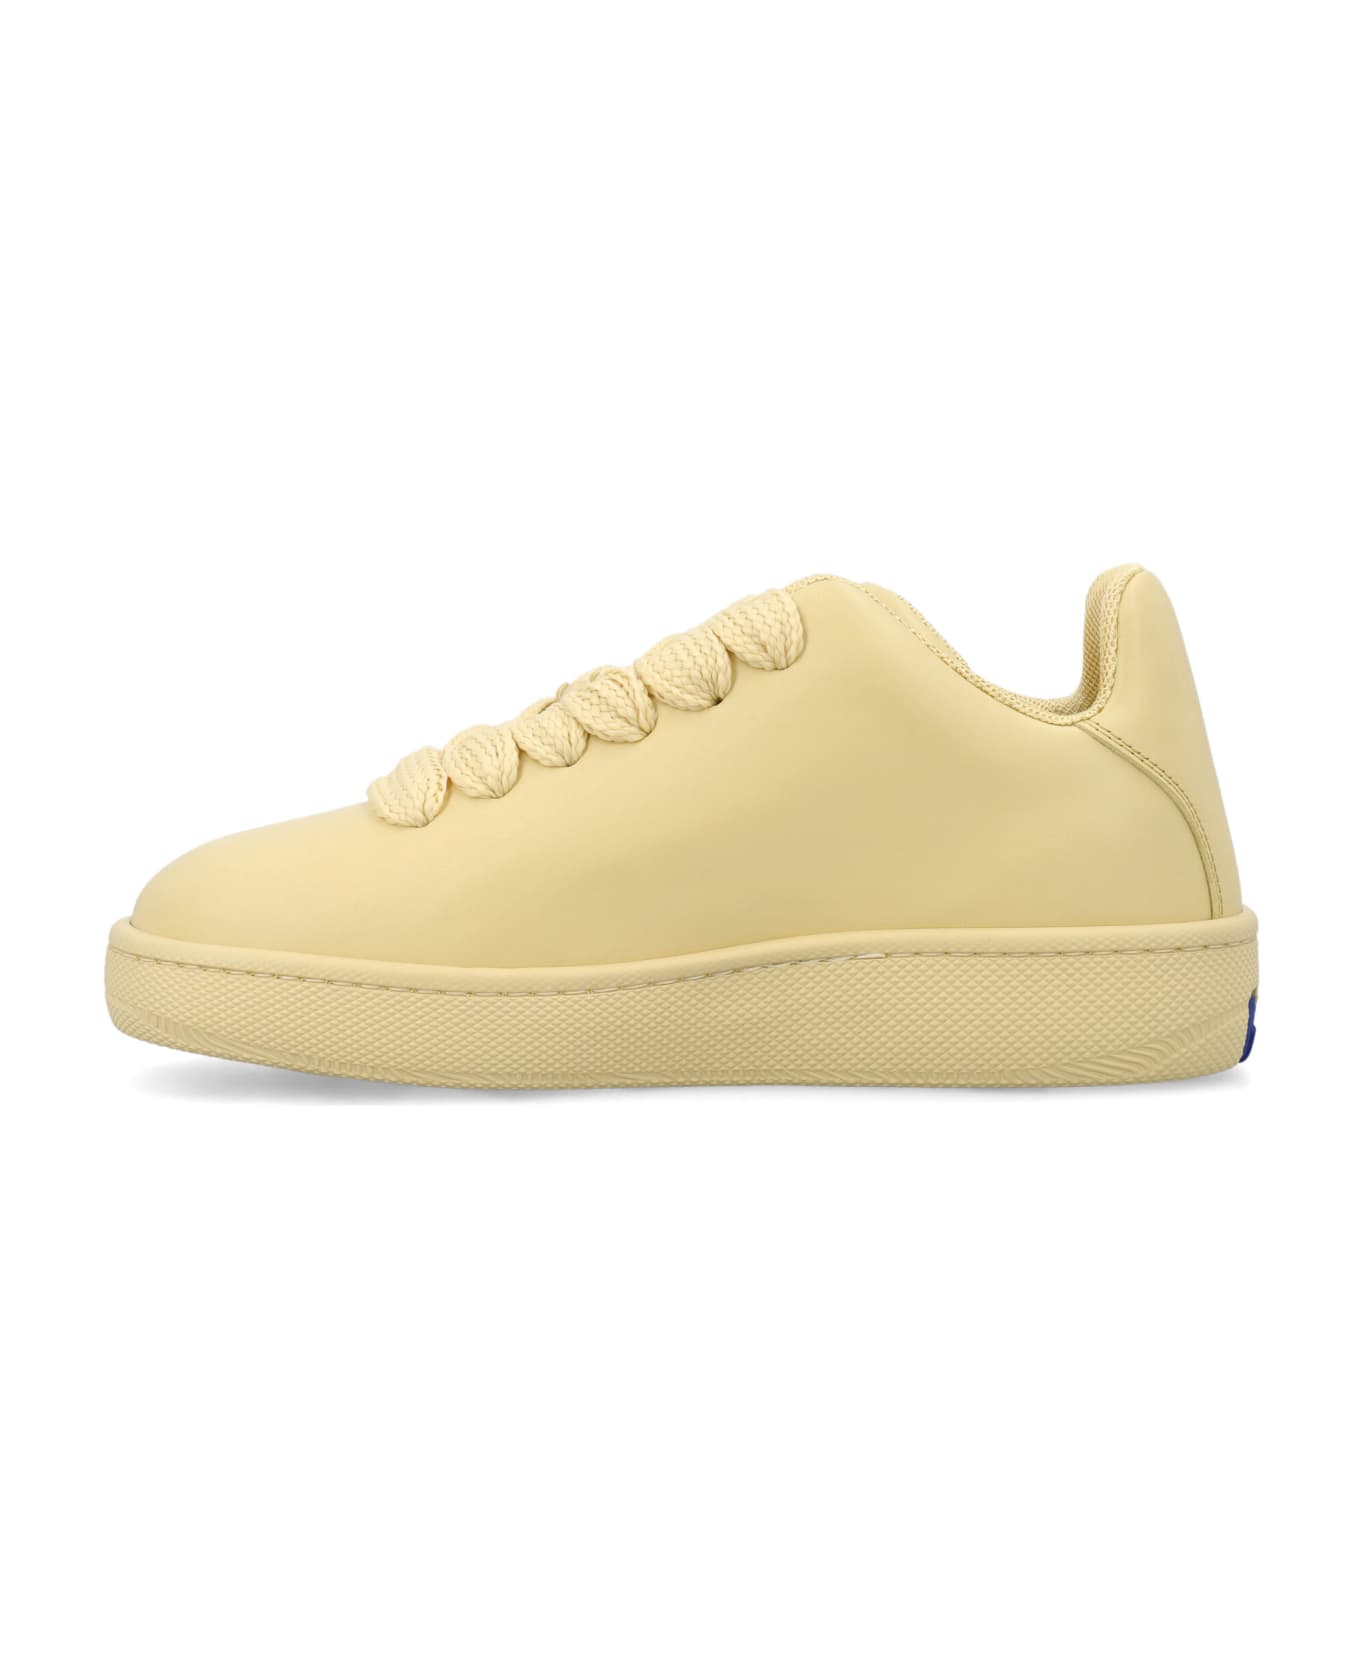 Burberry London Leather Box Sneakers - DAFFODIL